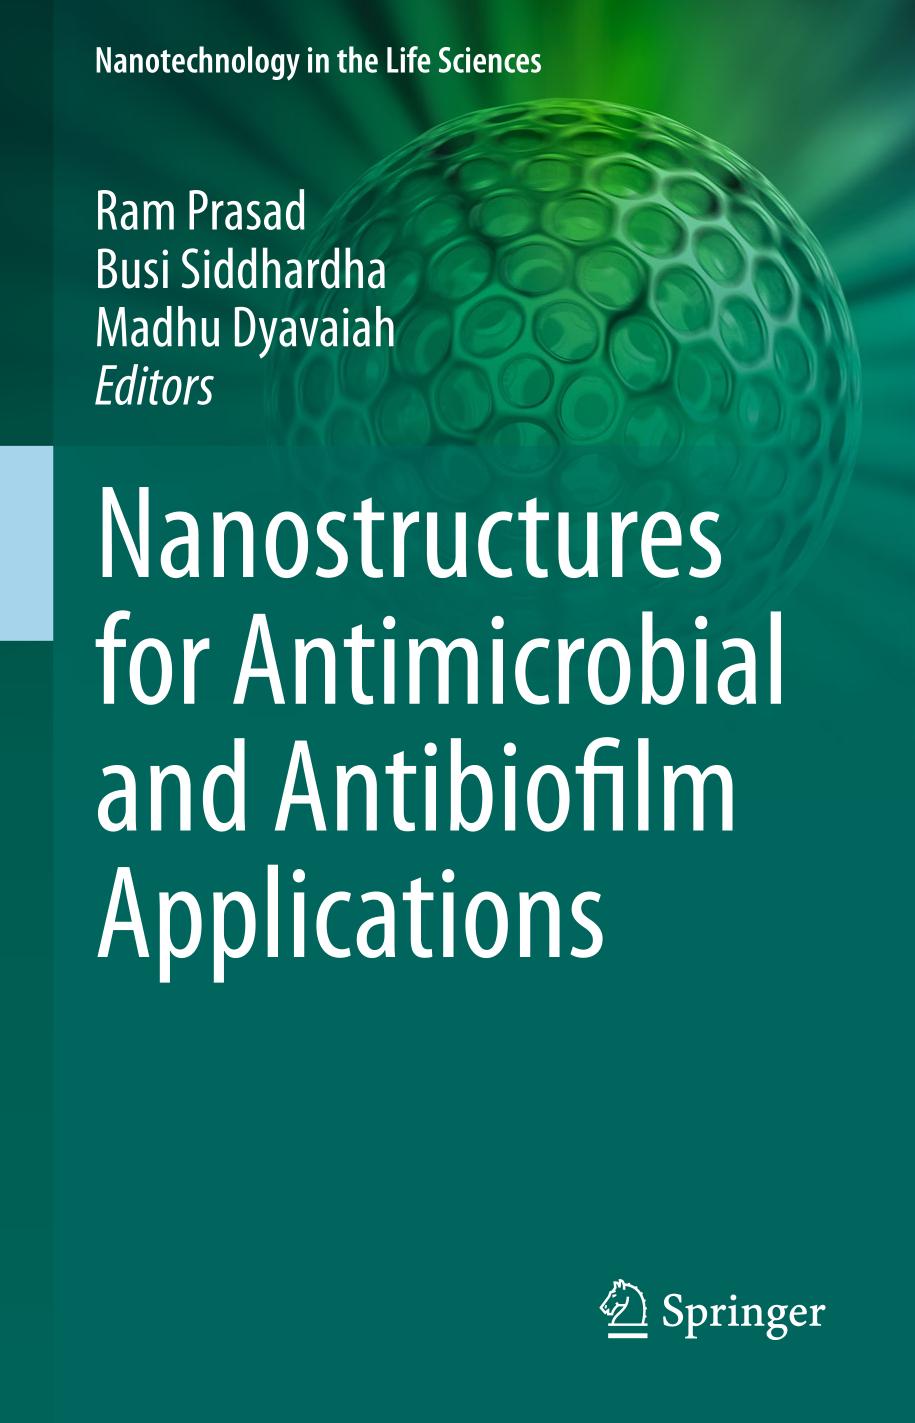 Nanostructures for antimicrobial and antibiofilm applications